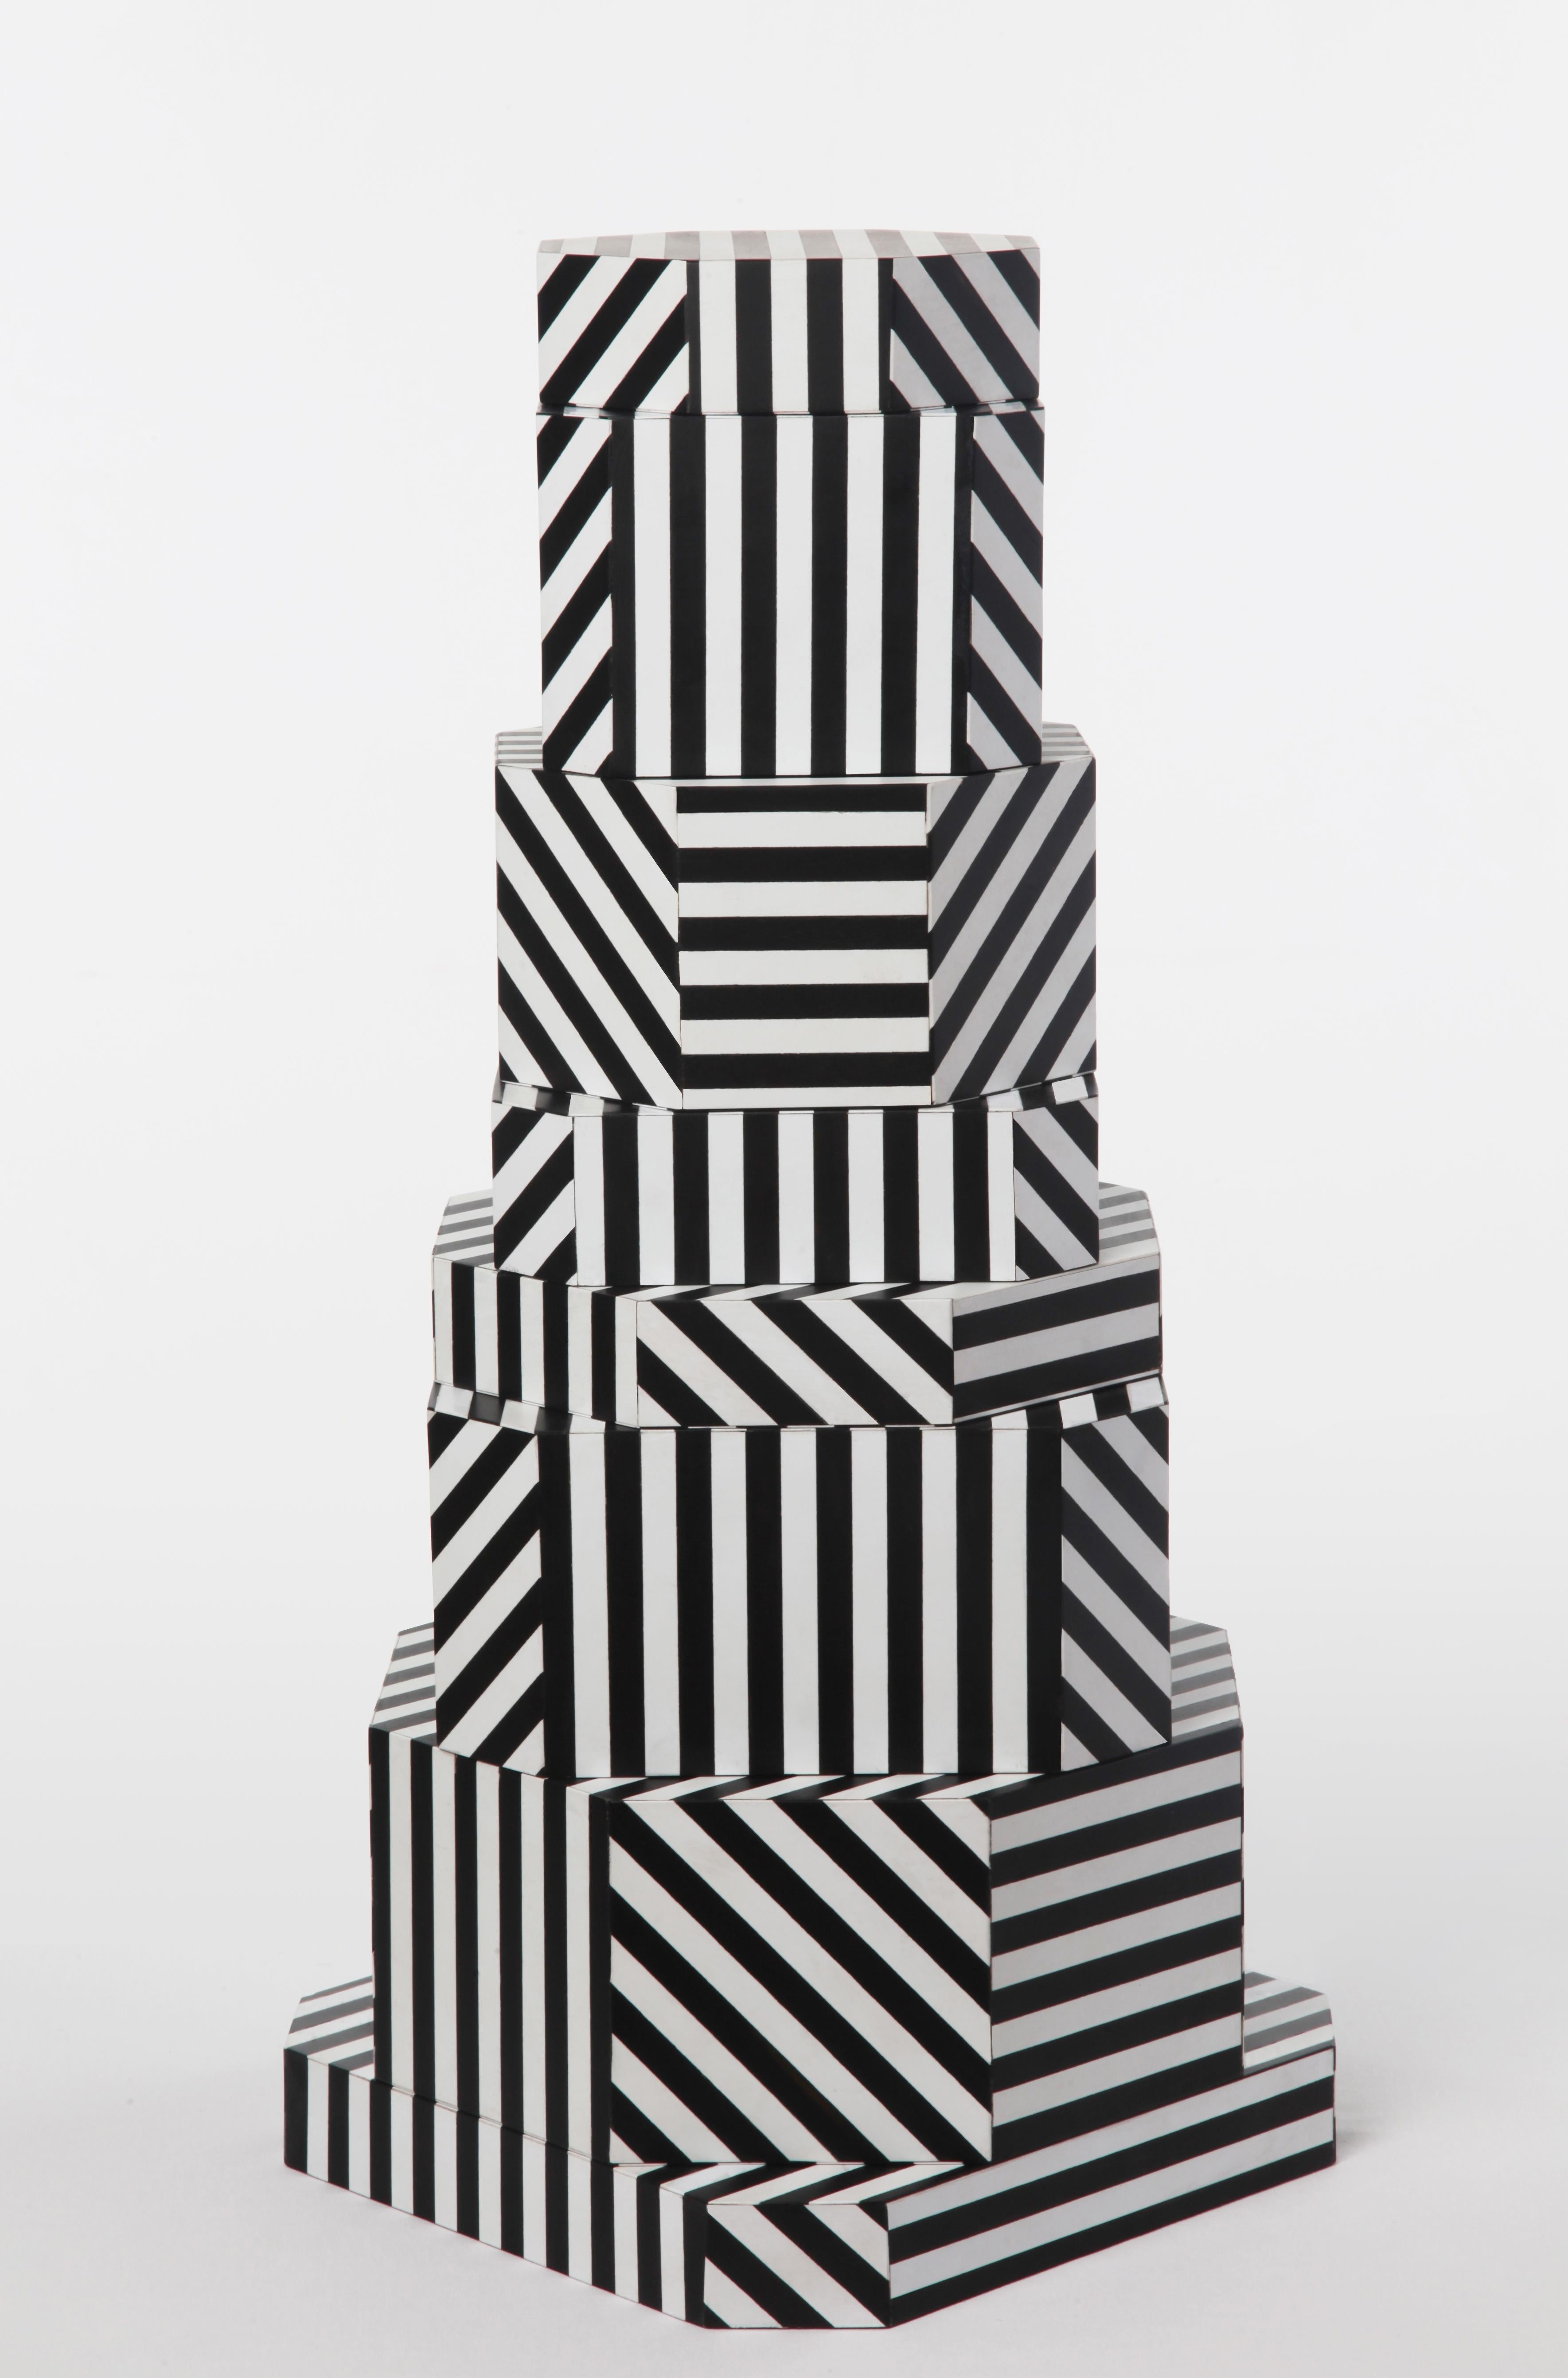 Black Stripes Ziggurat boxes by Oeuffice
Edition: 12 + 2AP
2012
Dimensions: 25 x 25 x 55 cm
Materials: Wood box, acrylic, solid stained wood

The black Stripes edition evokes bold and linear details akin to Optical
Art. With a rich inlaid